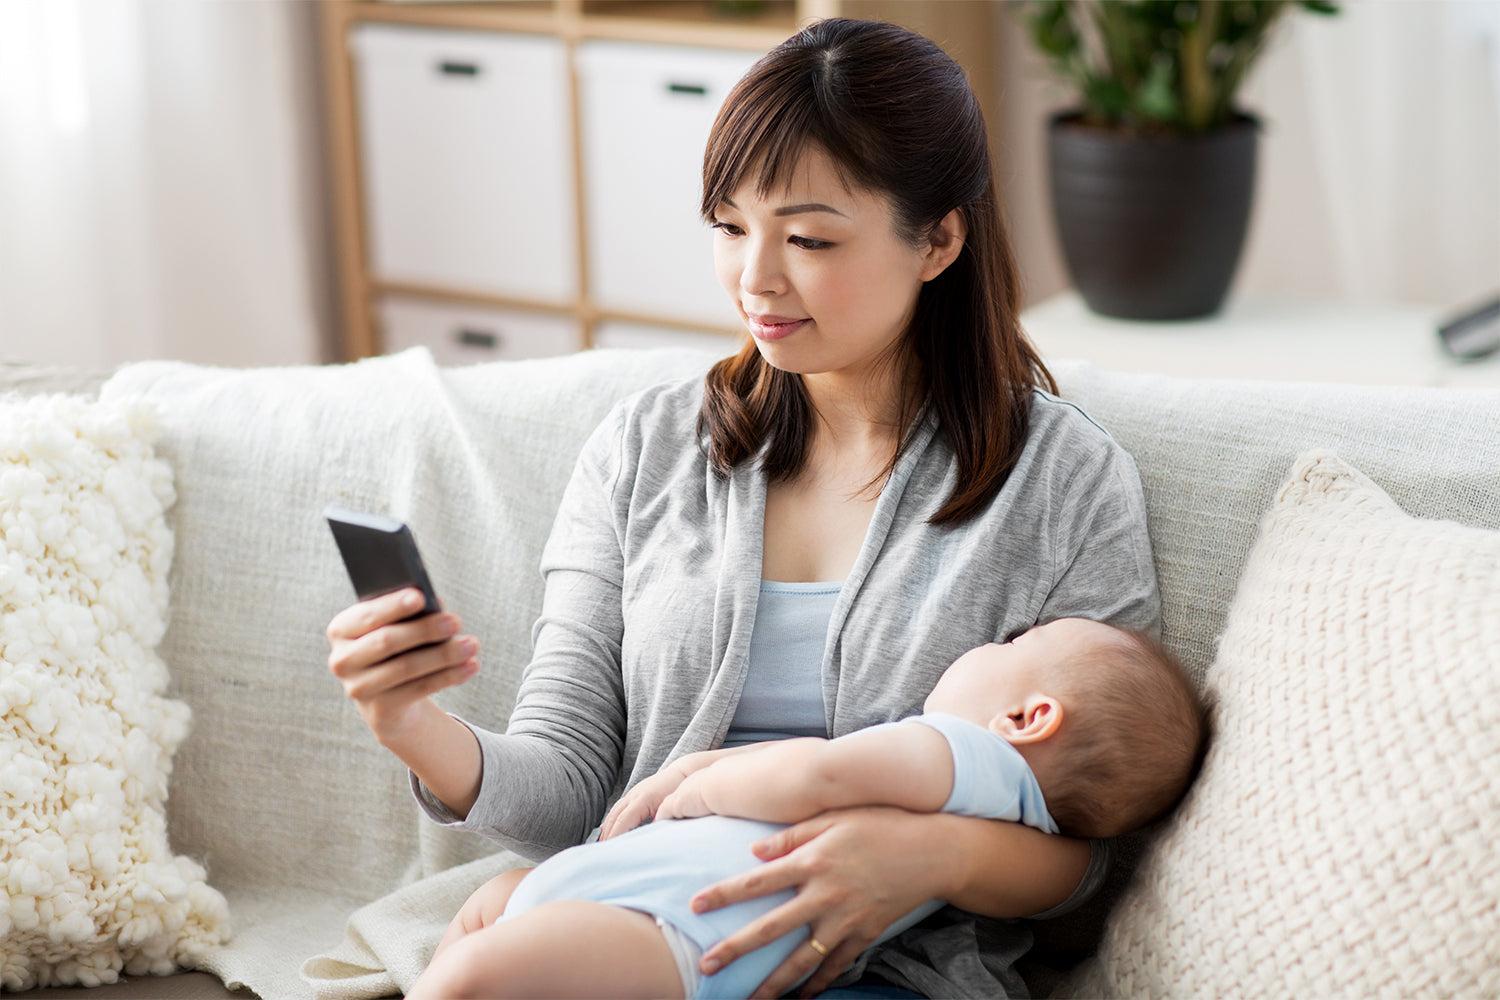 mother checking on a phone app while taking care of baby